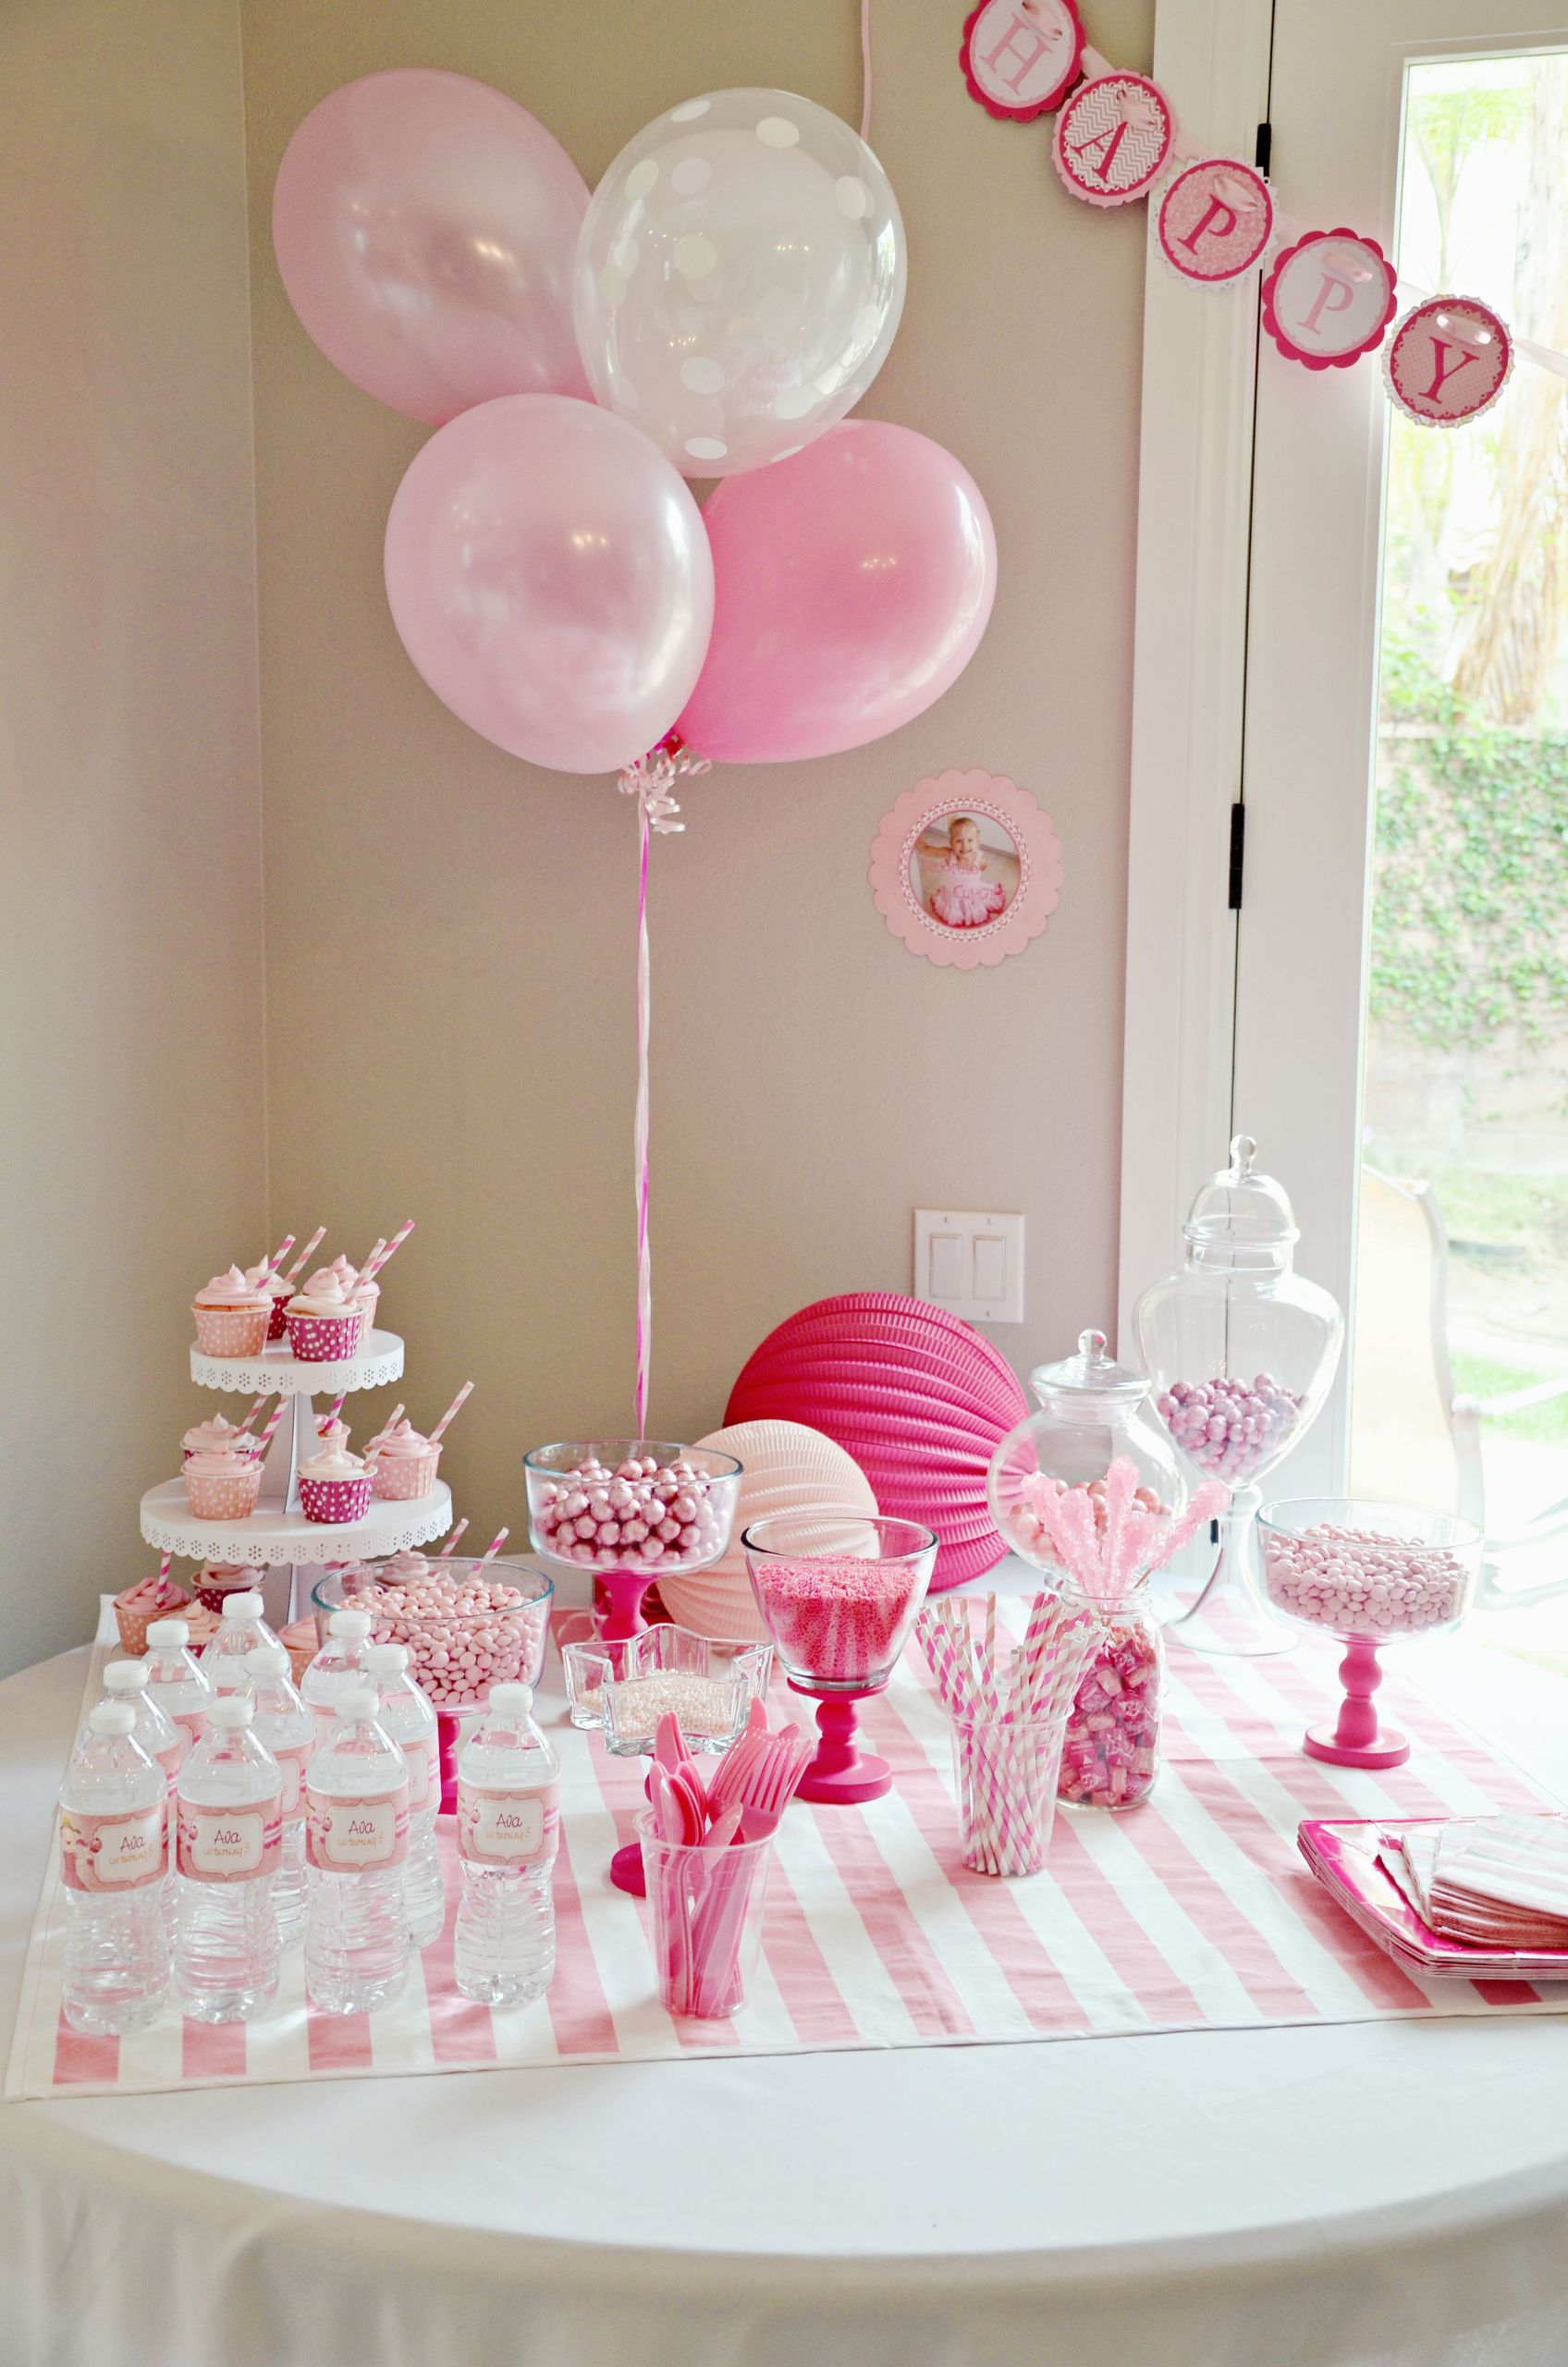 Birthday Party Ideas For 2 Year Old Girl
 A Pinkalicious themed party for a 3 year old